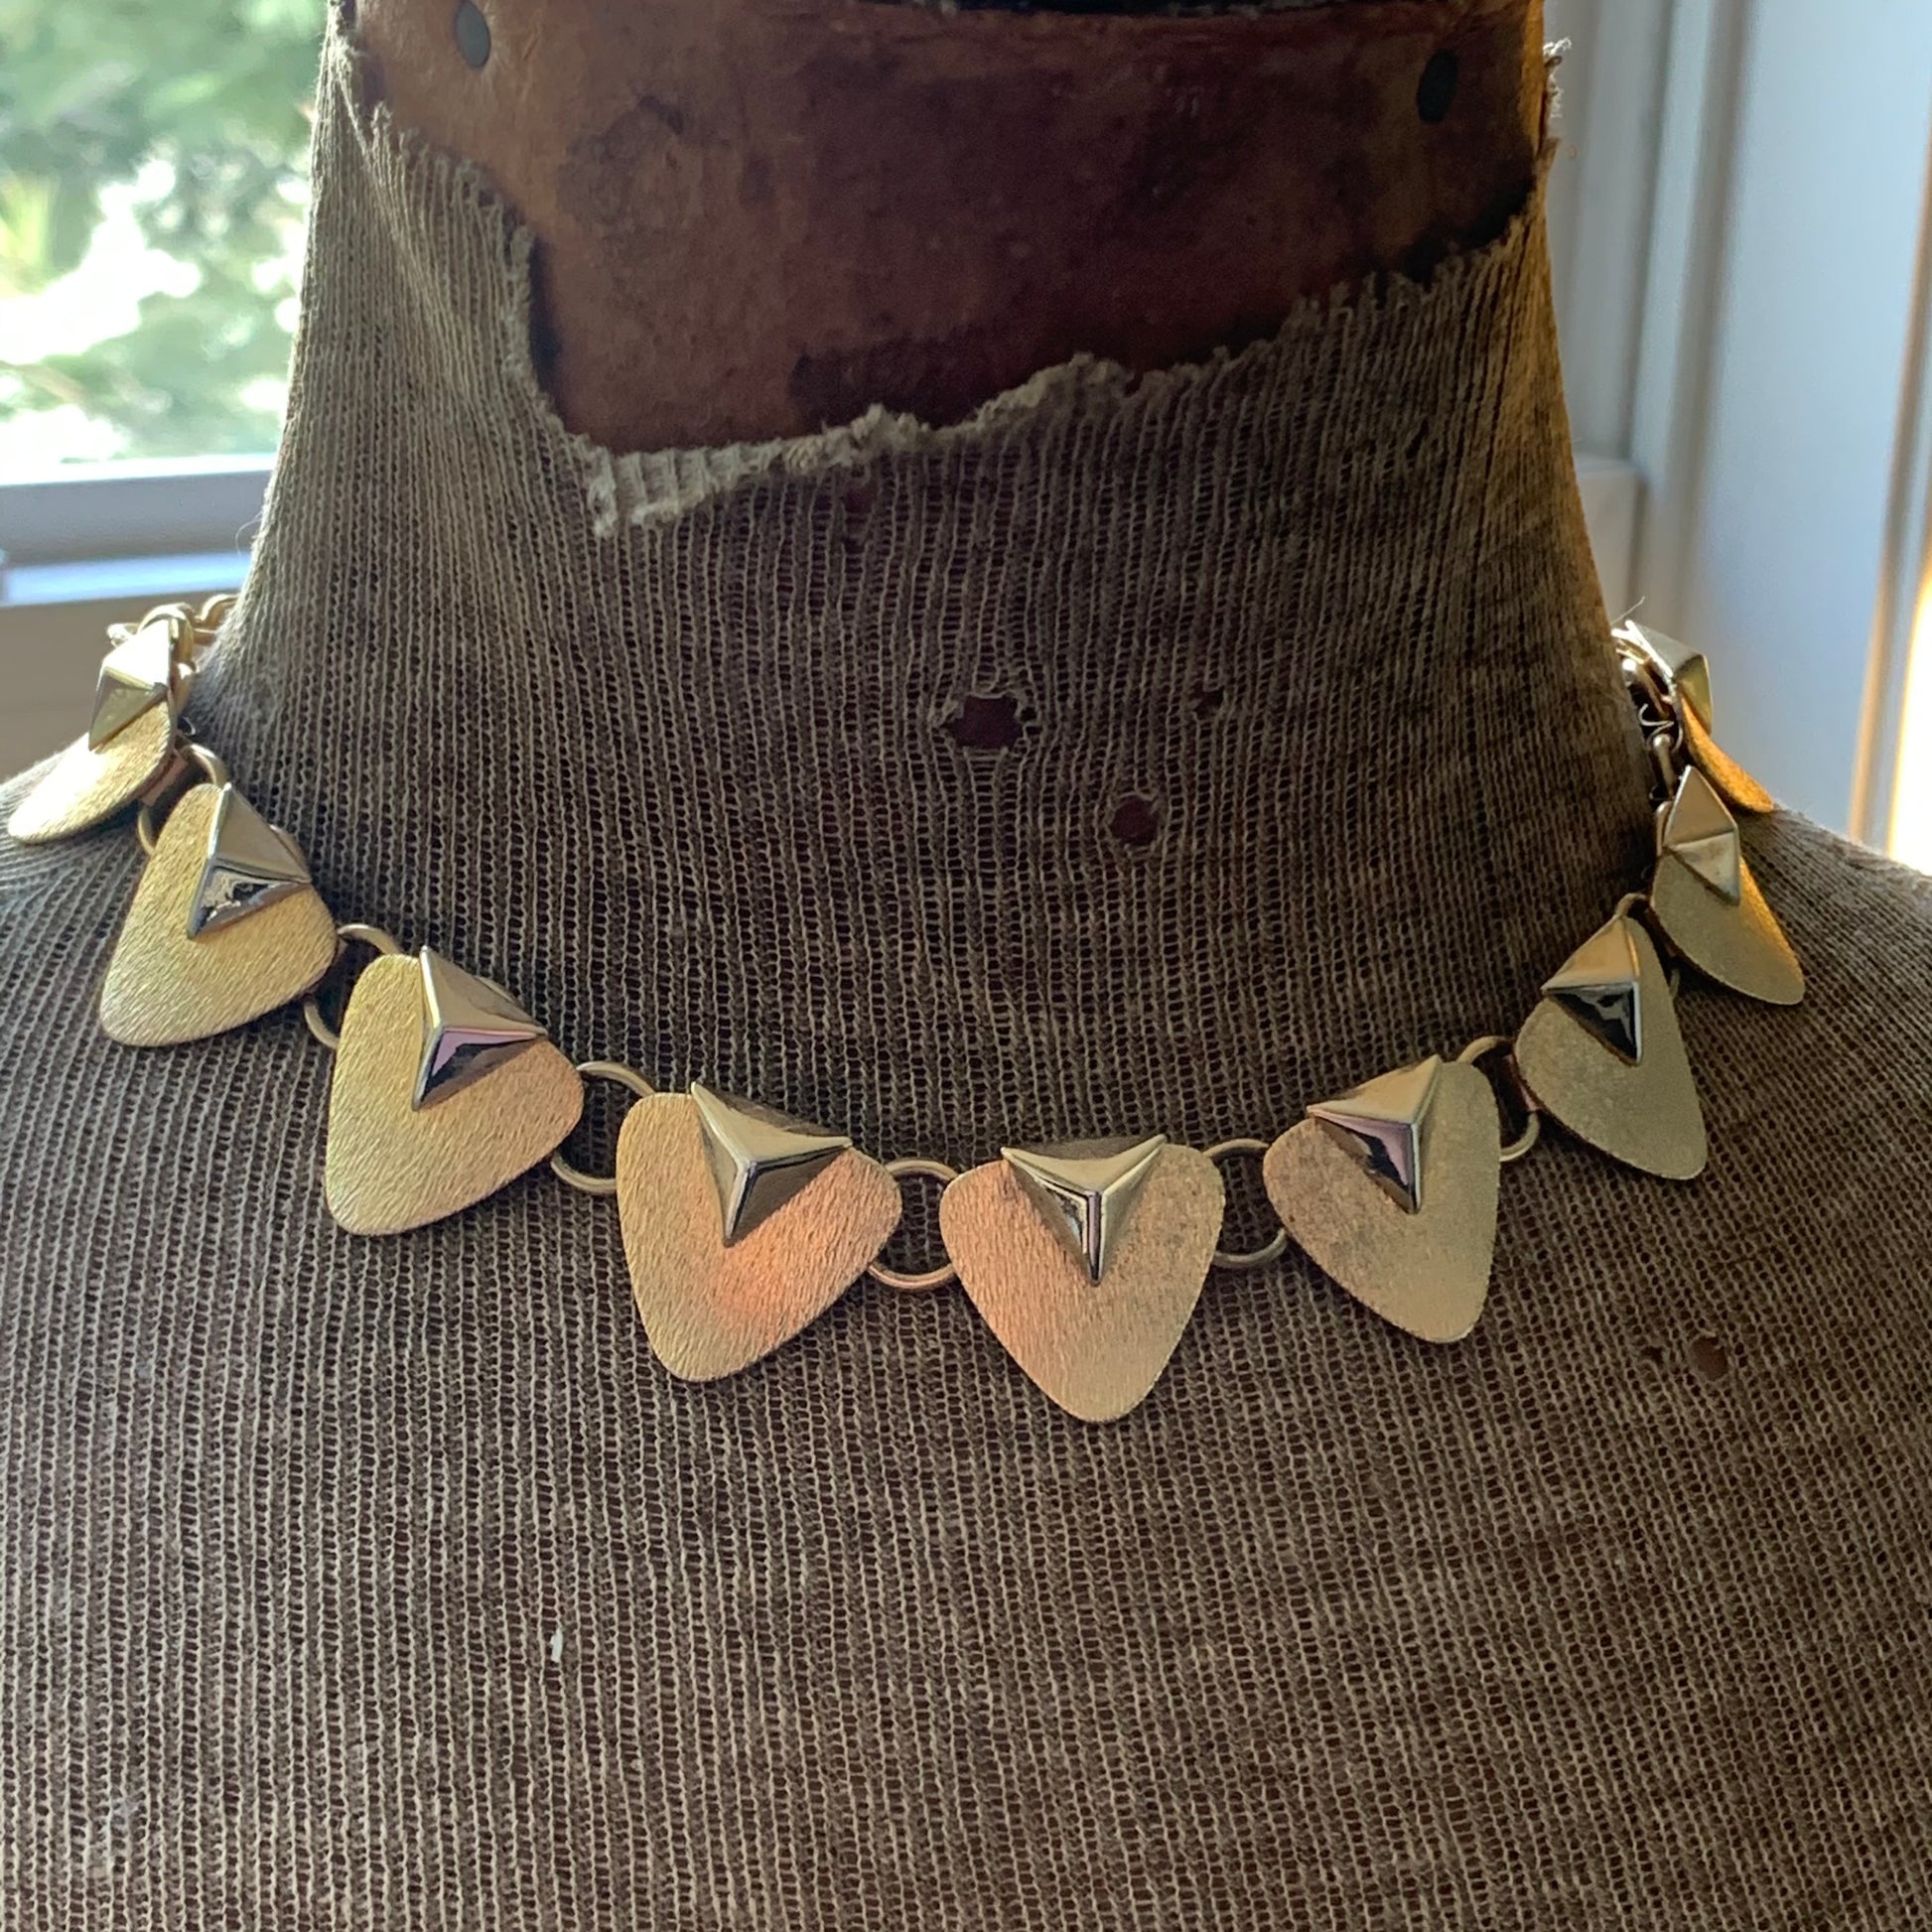 Vintage Modern Looking Egyptian Collar Necklace